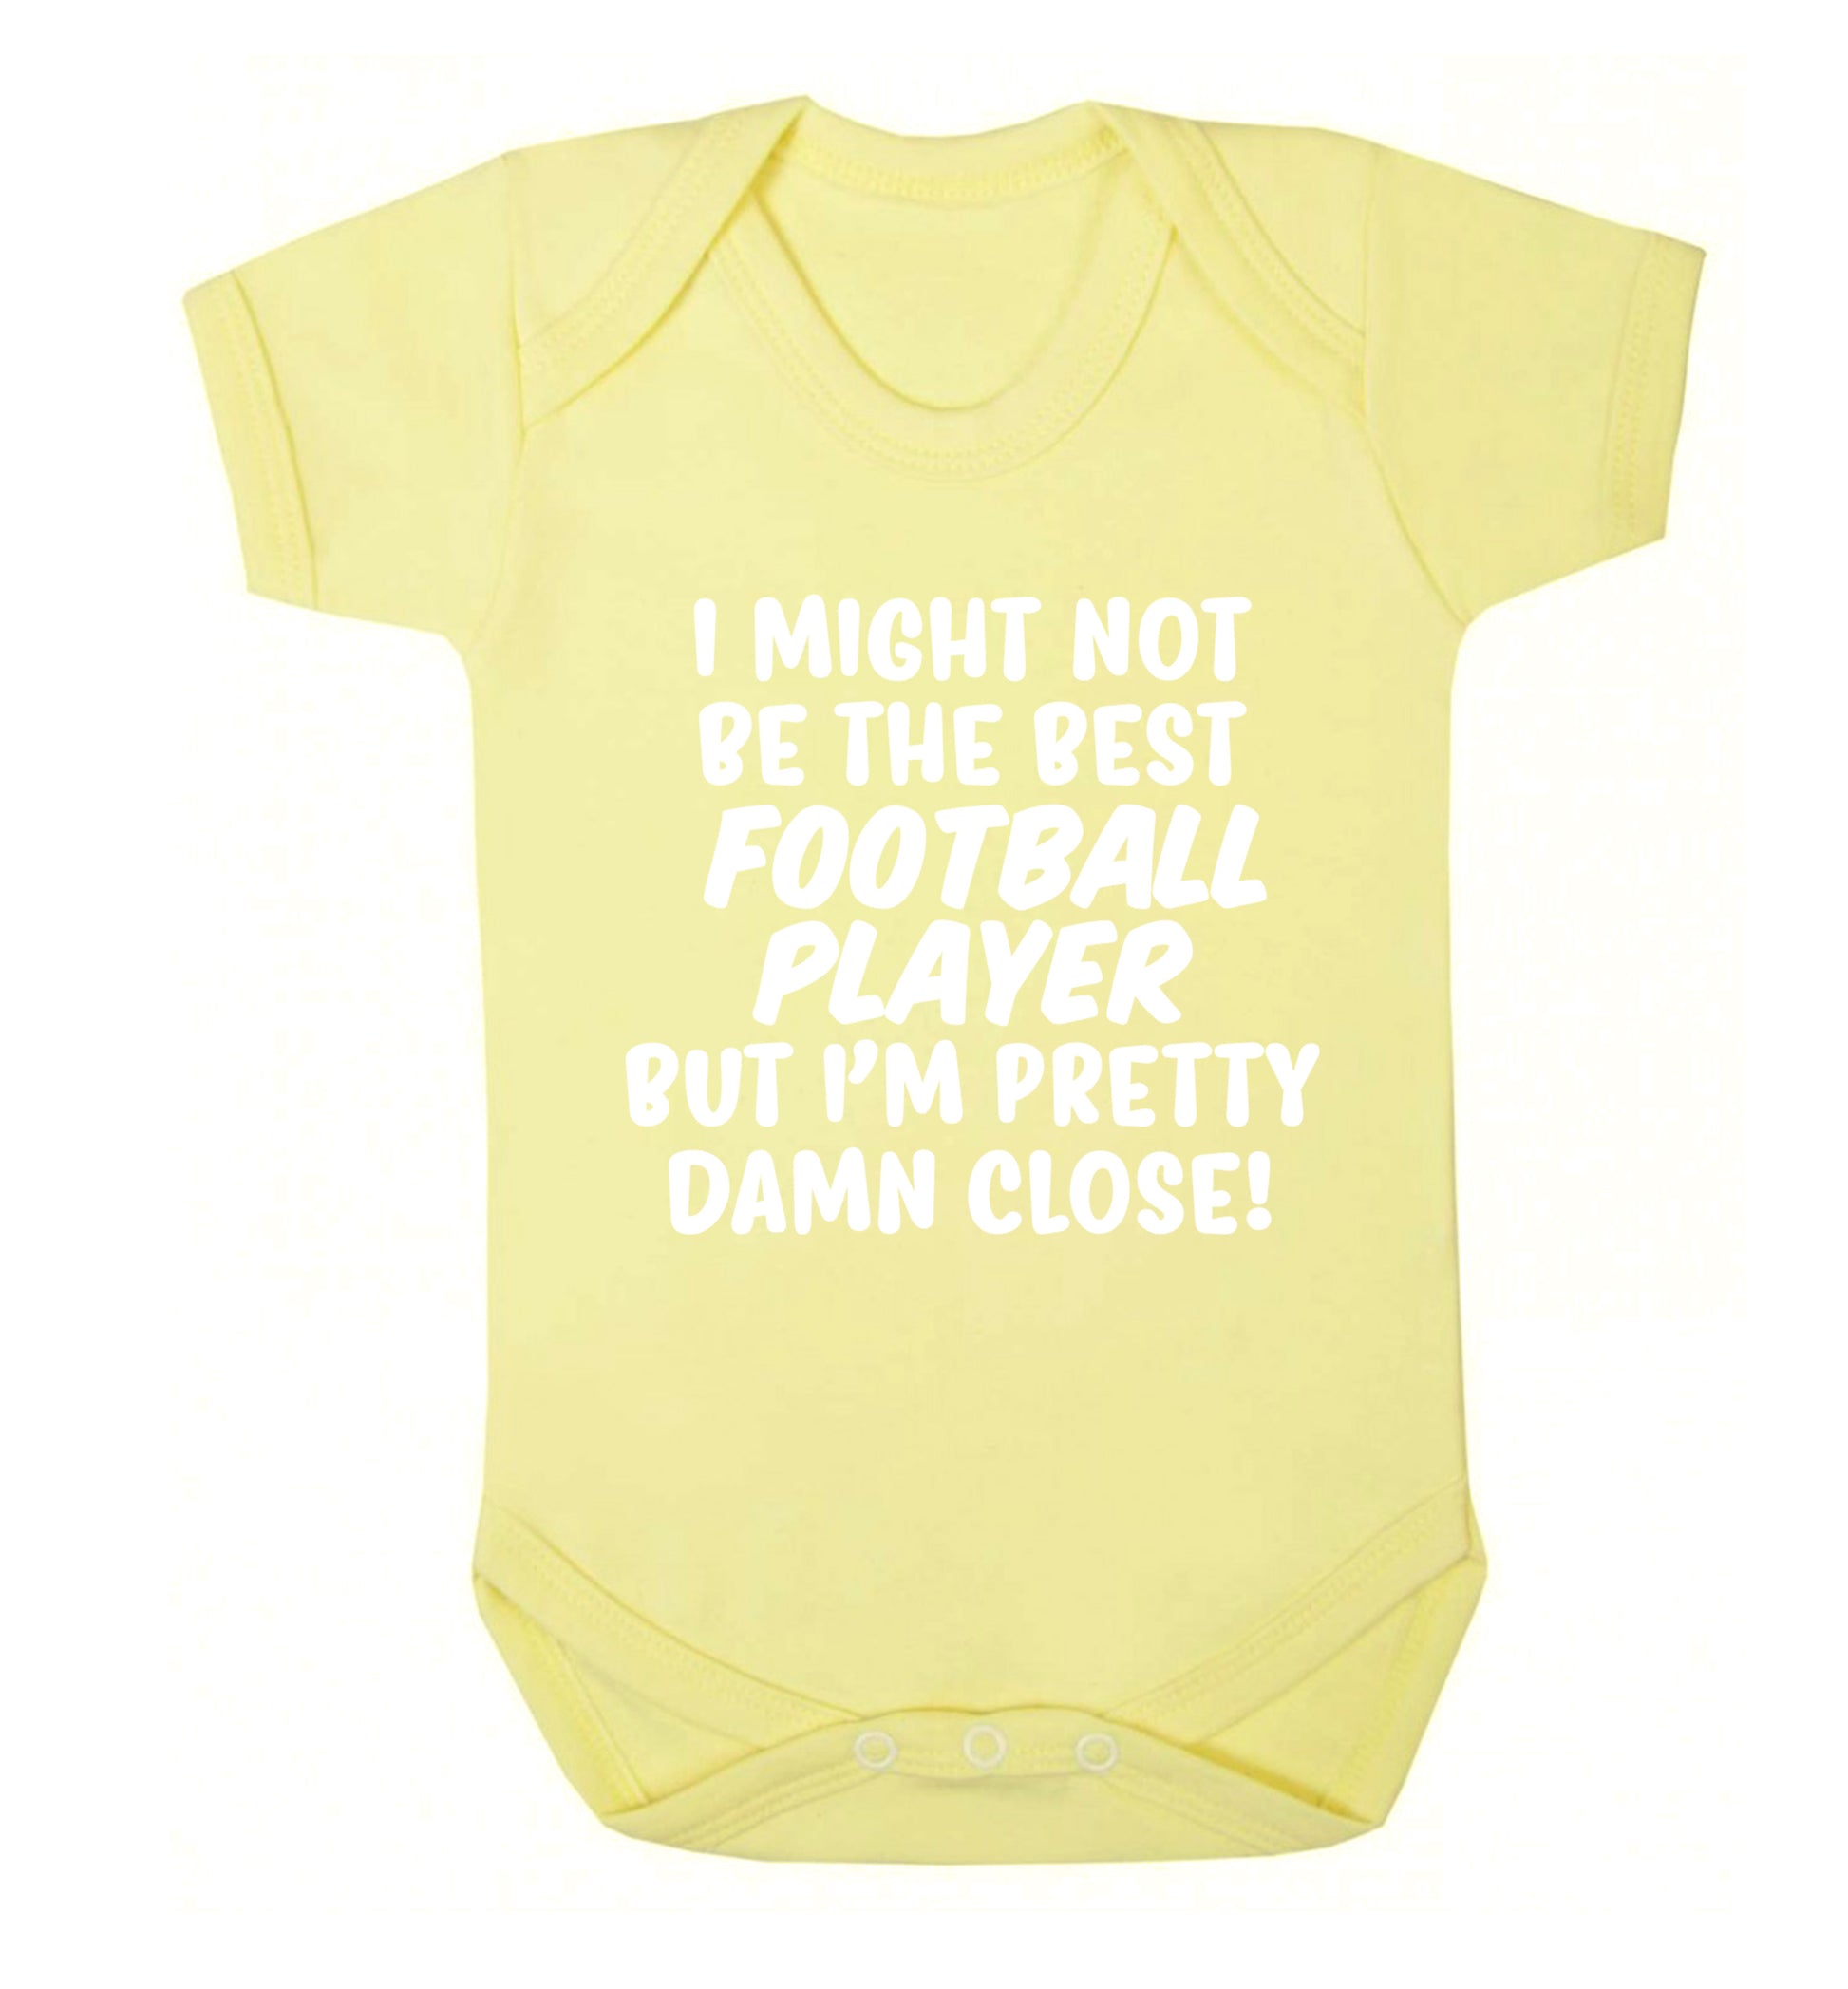 I might not be the best football player but I'm pretty close! Baby Vest pale yellow 18-24 months